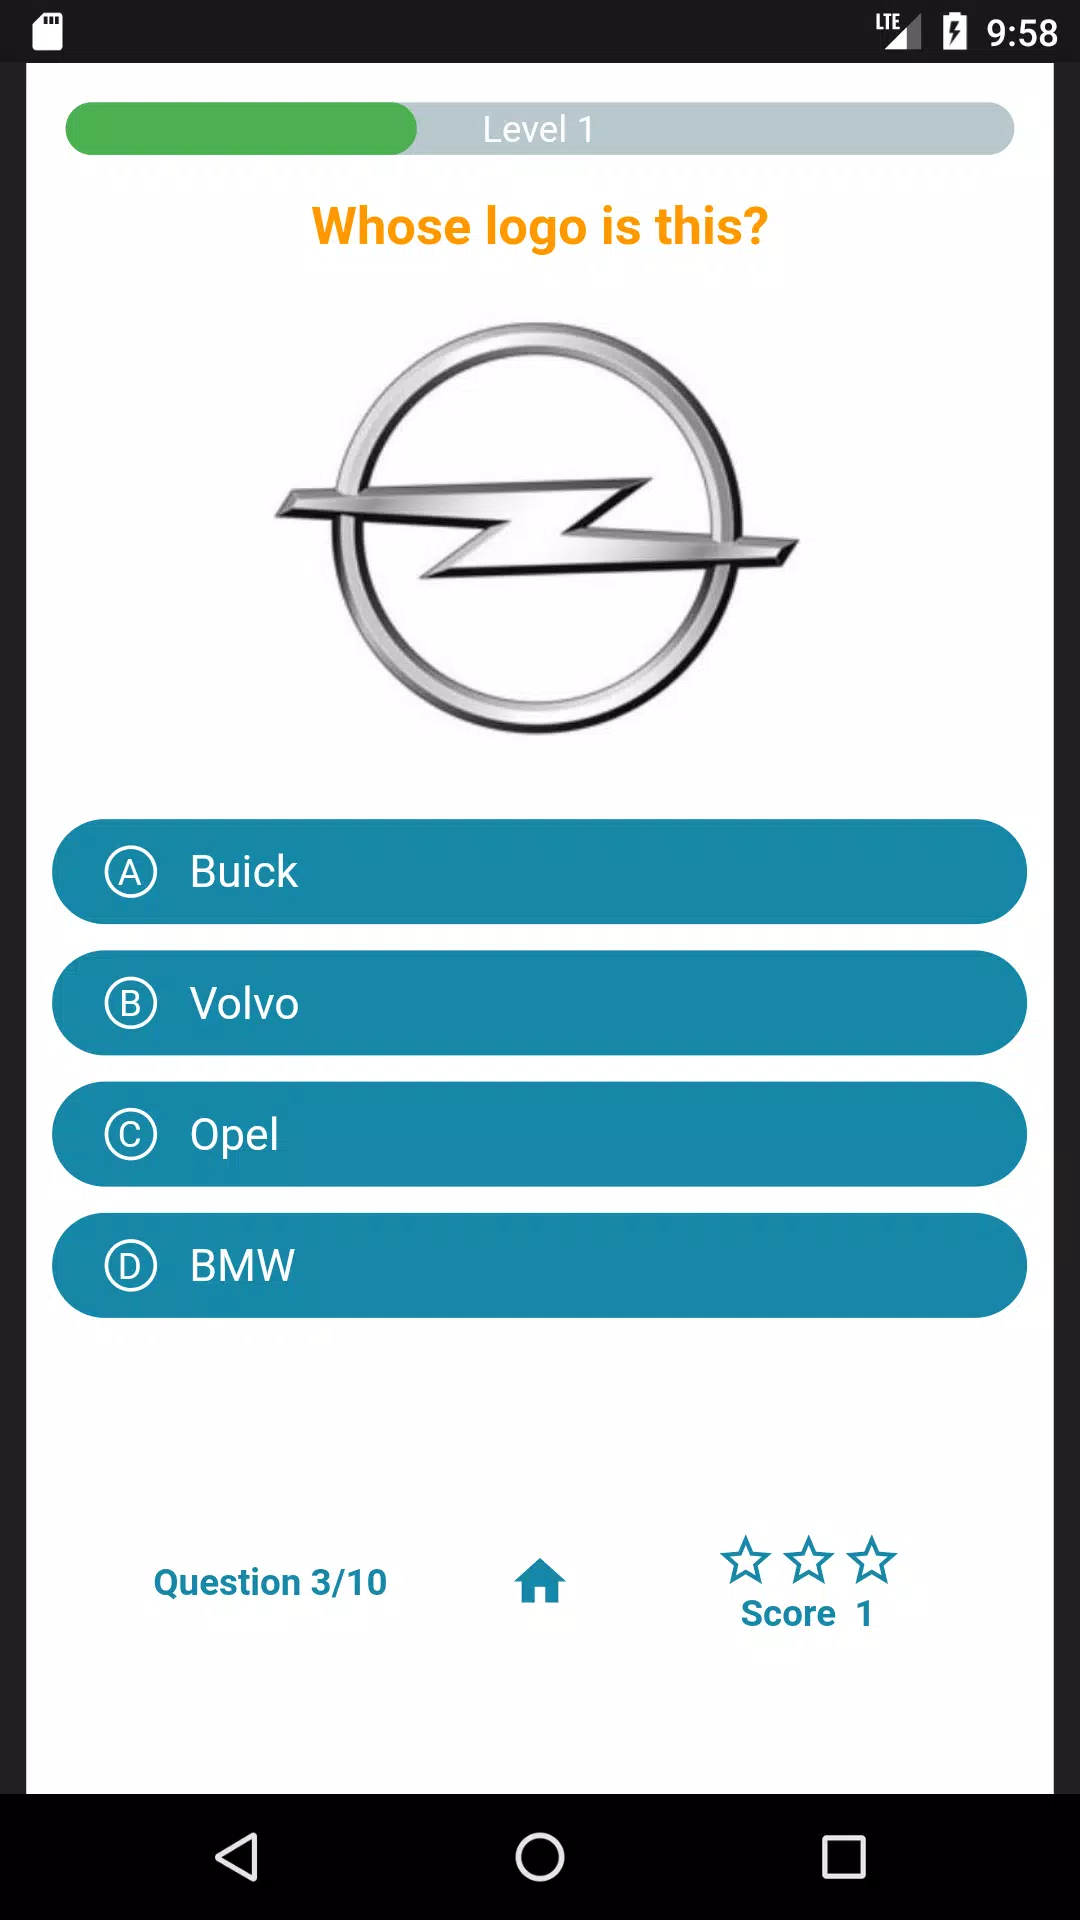 Car Mechanic - Quiz game for Android - APK Download